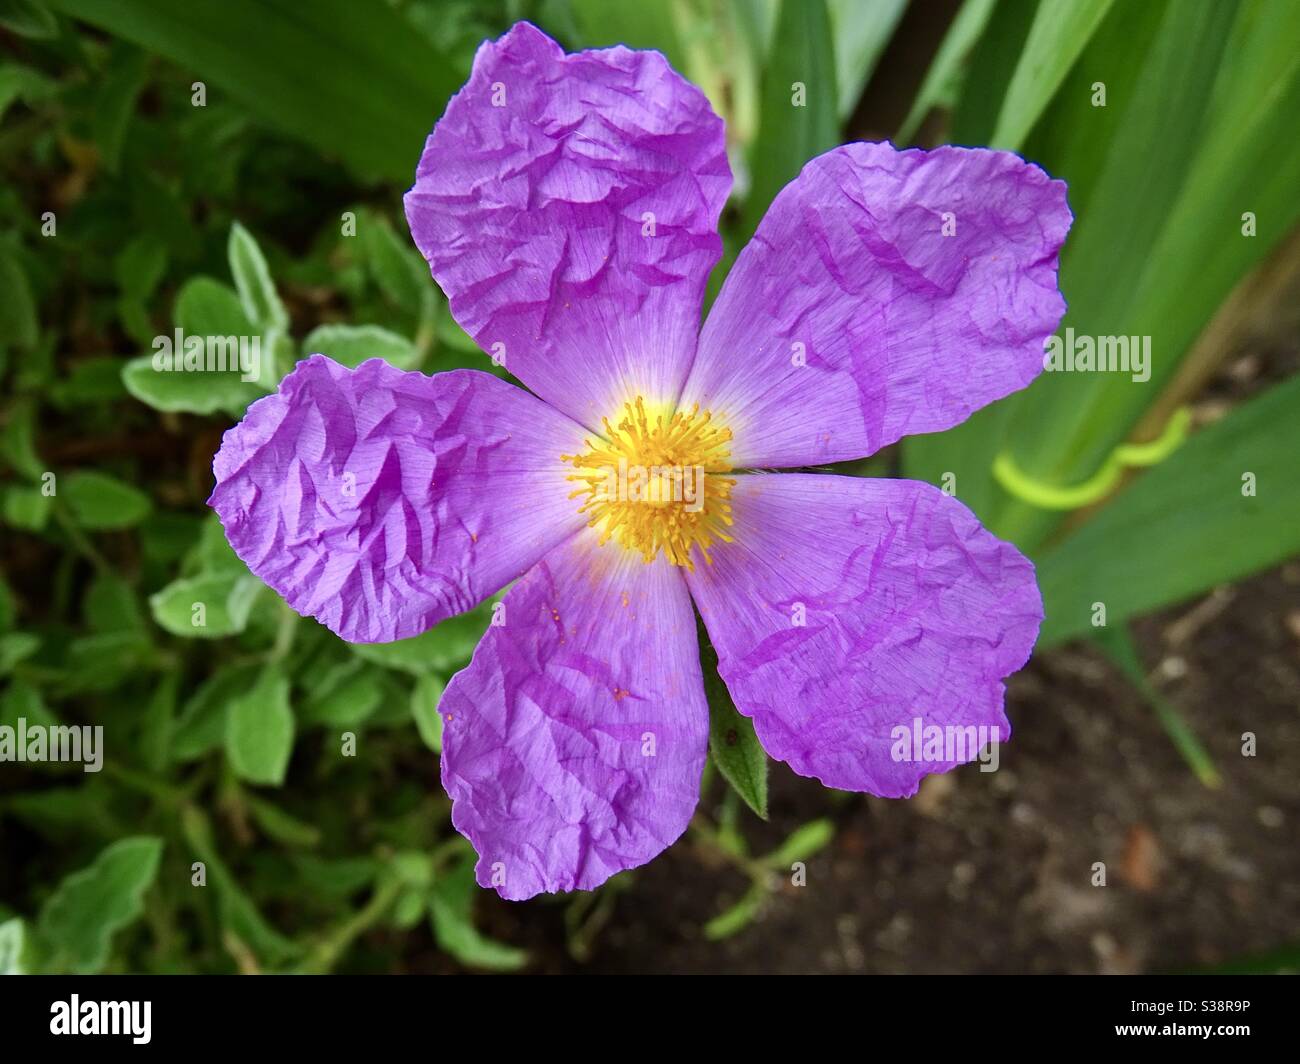 Purple and yellow rock rose flower in a garden Stock Photo